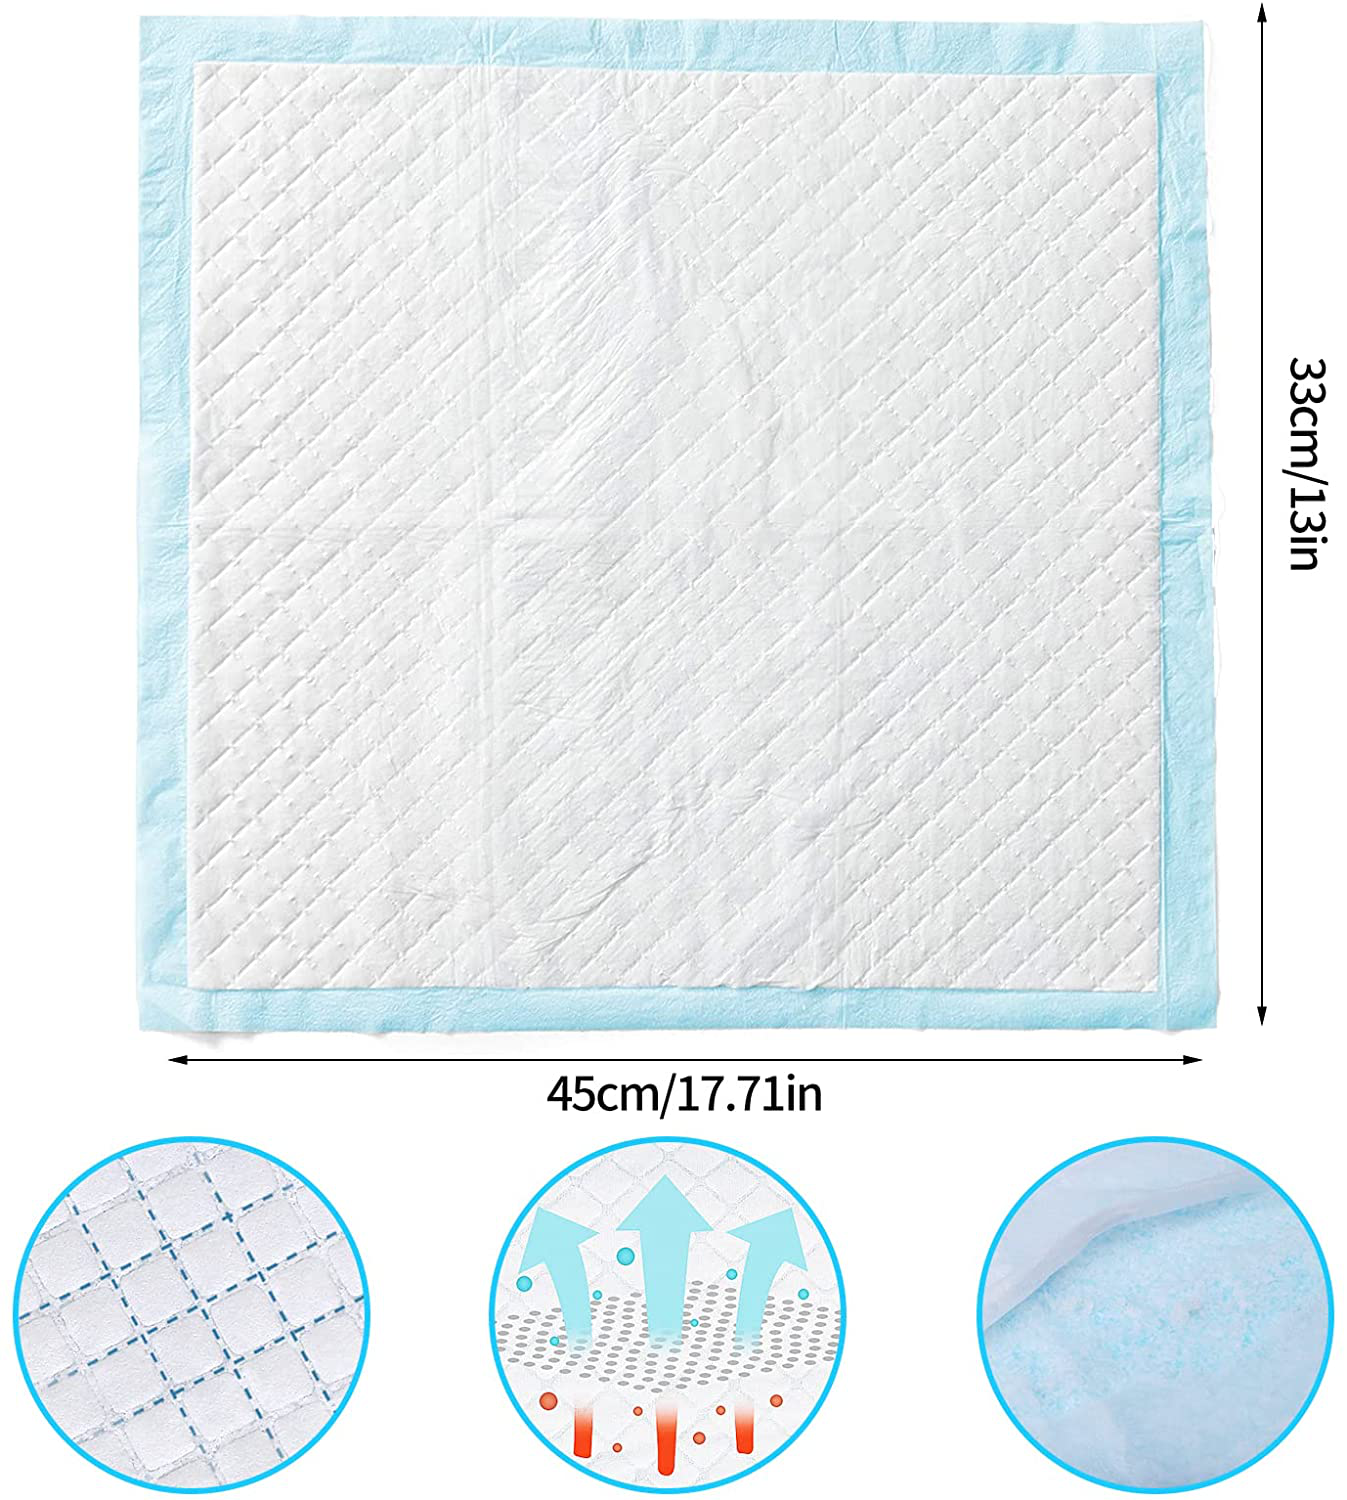 CAILOS Rabbit Pee Pads, Disposable Super Absorbent Diaper, Pet Toilet/Potty Training Pads for Guinea Pigs, Hedgehog, Hamsters, Chinchillas, Cats, and Other Small Animals